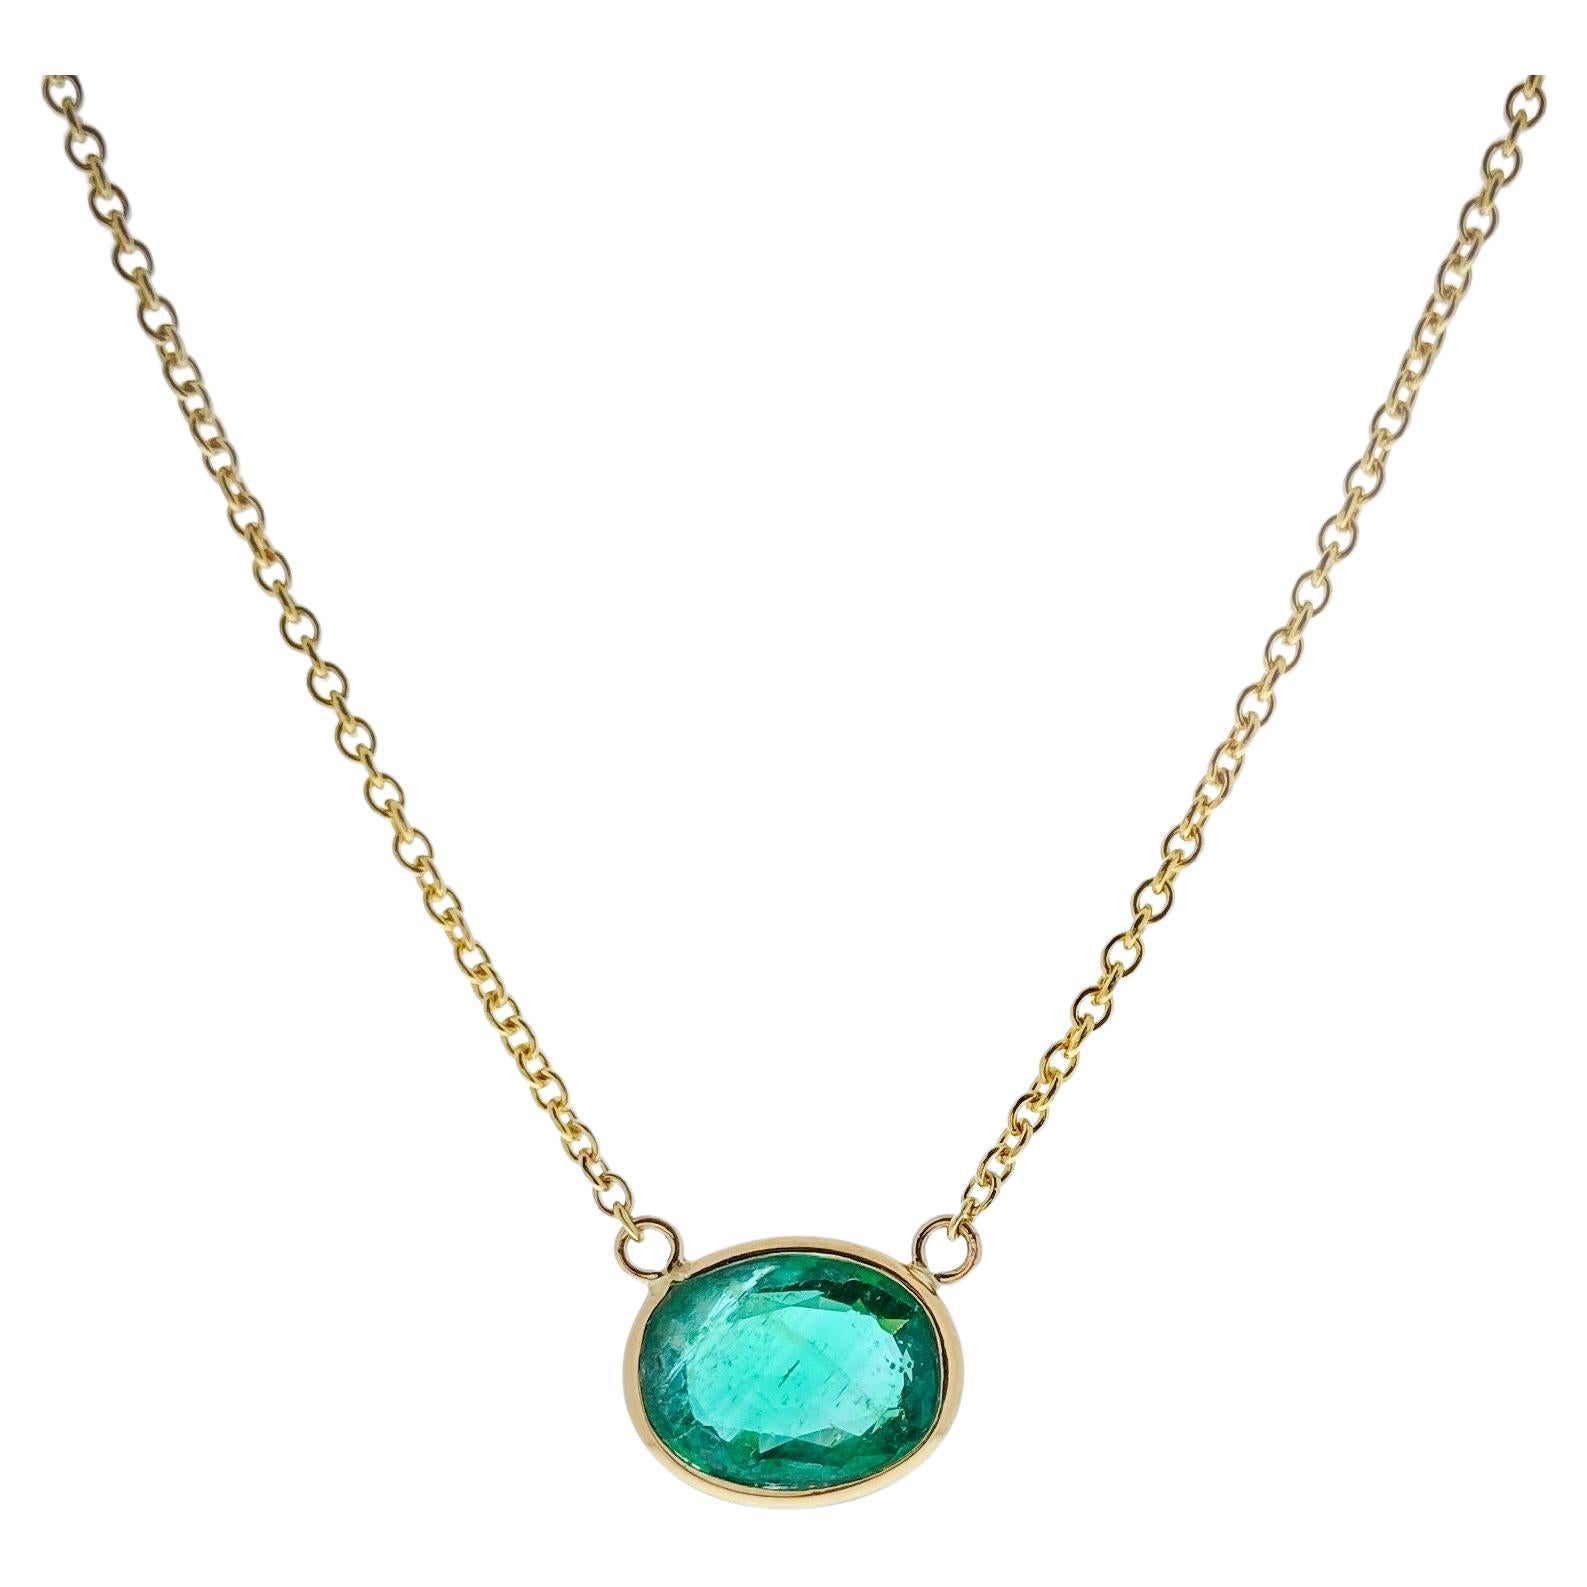 1.41 Carat Green Emerald Oval Cut Fashion Necklaces In 14K Yellow Gold